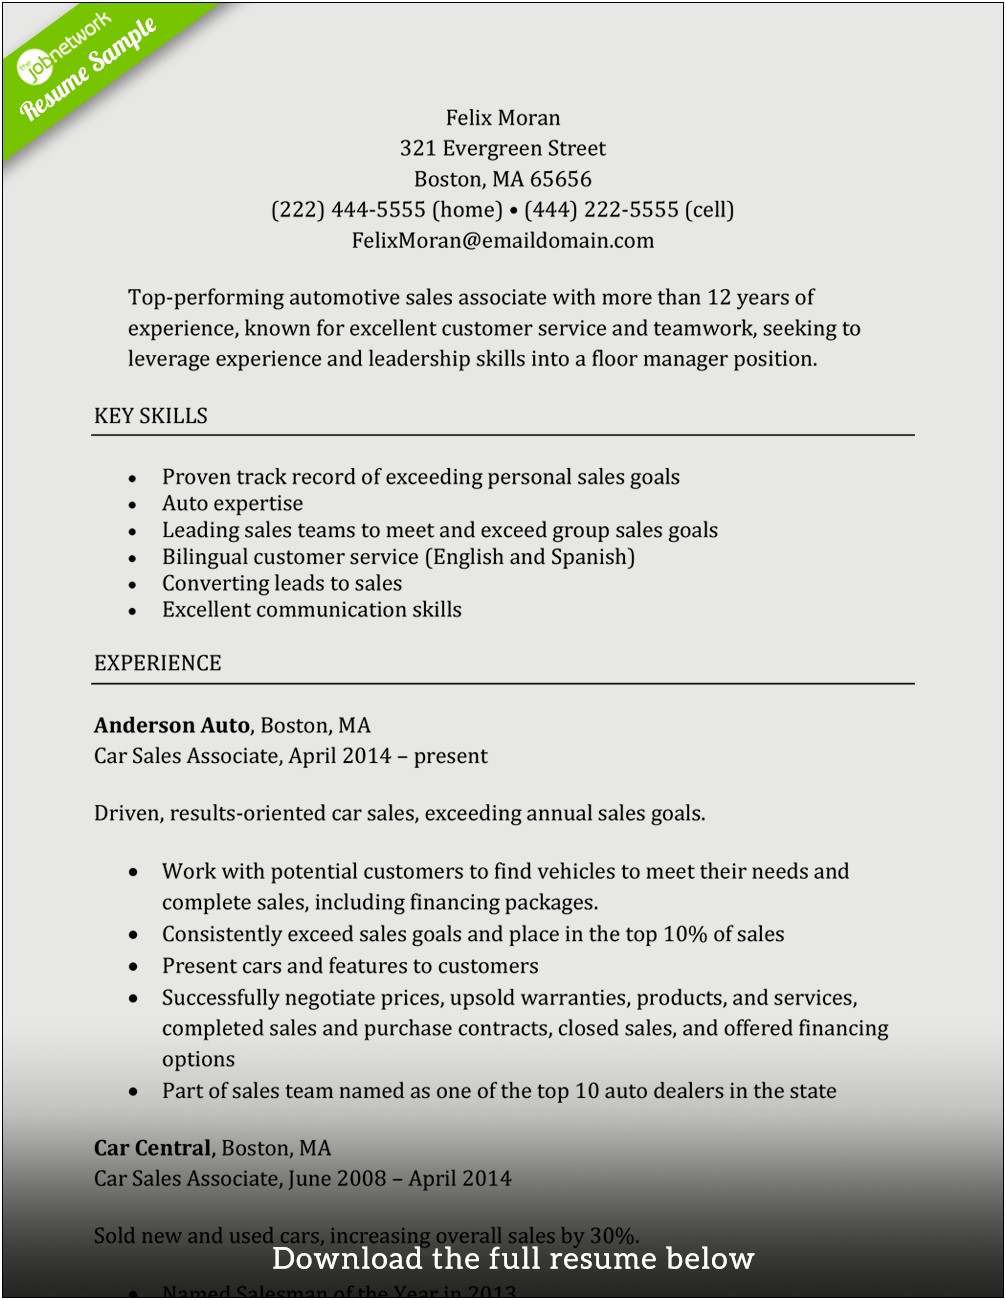 Special Skills For Sales Associate Resume